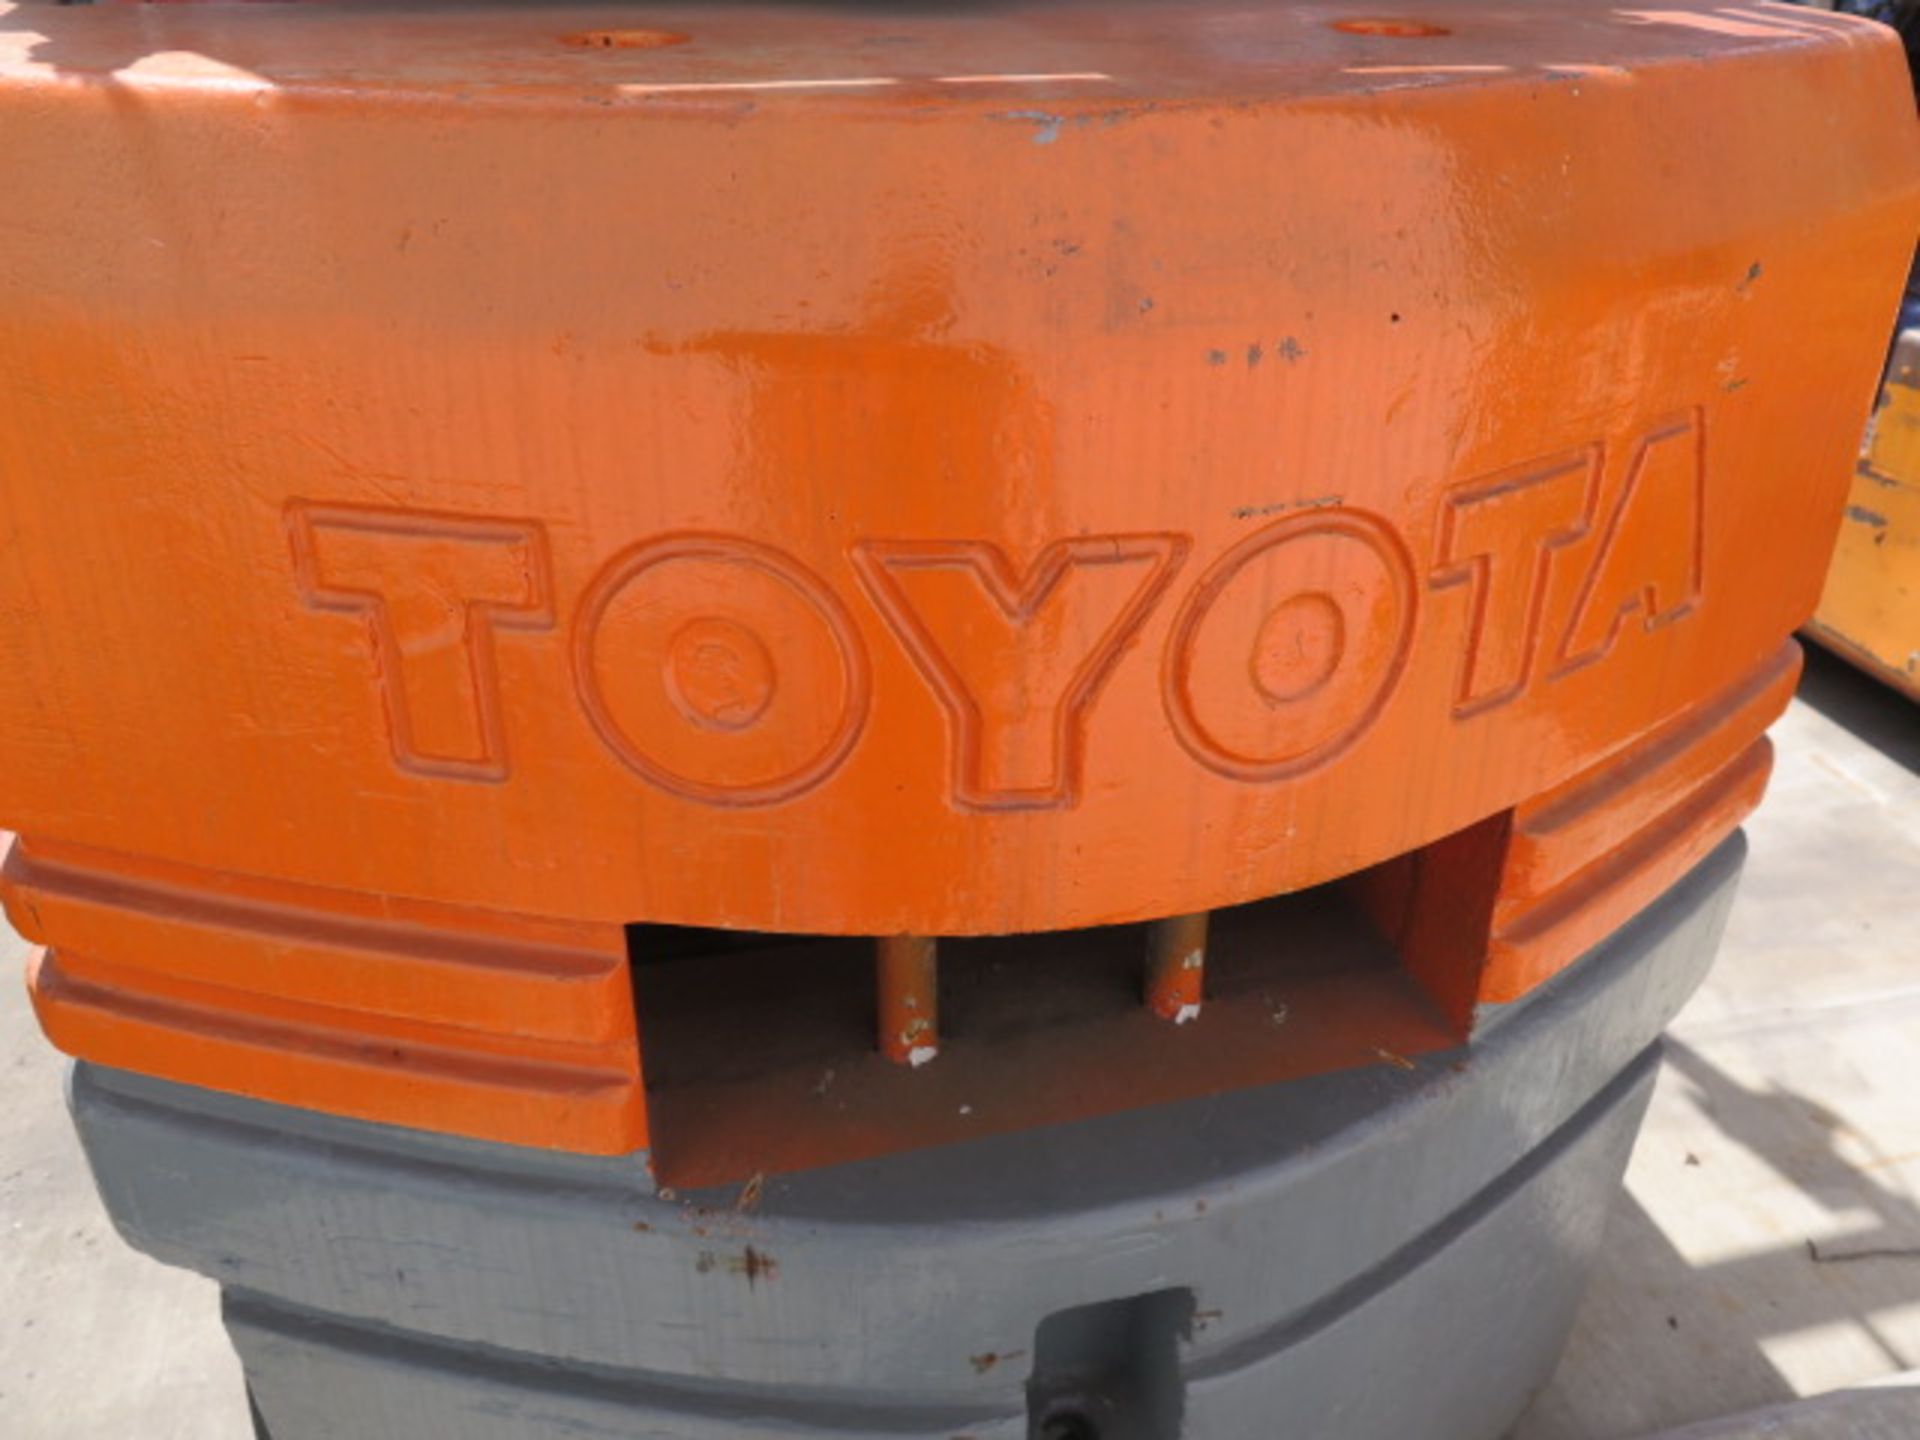 Toyota 5FGC25 5000 Lb Cap LPG Forklift s/n 5FGCU25-84777 w/ 3-Stage Mast, 169" Lift Height, - Image 4 of 12